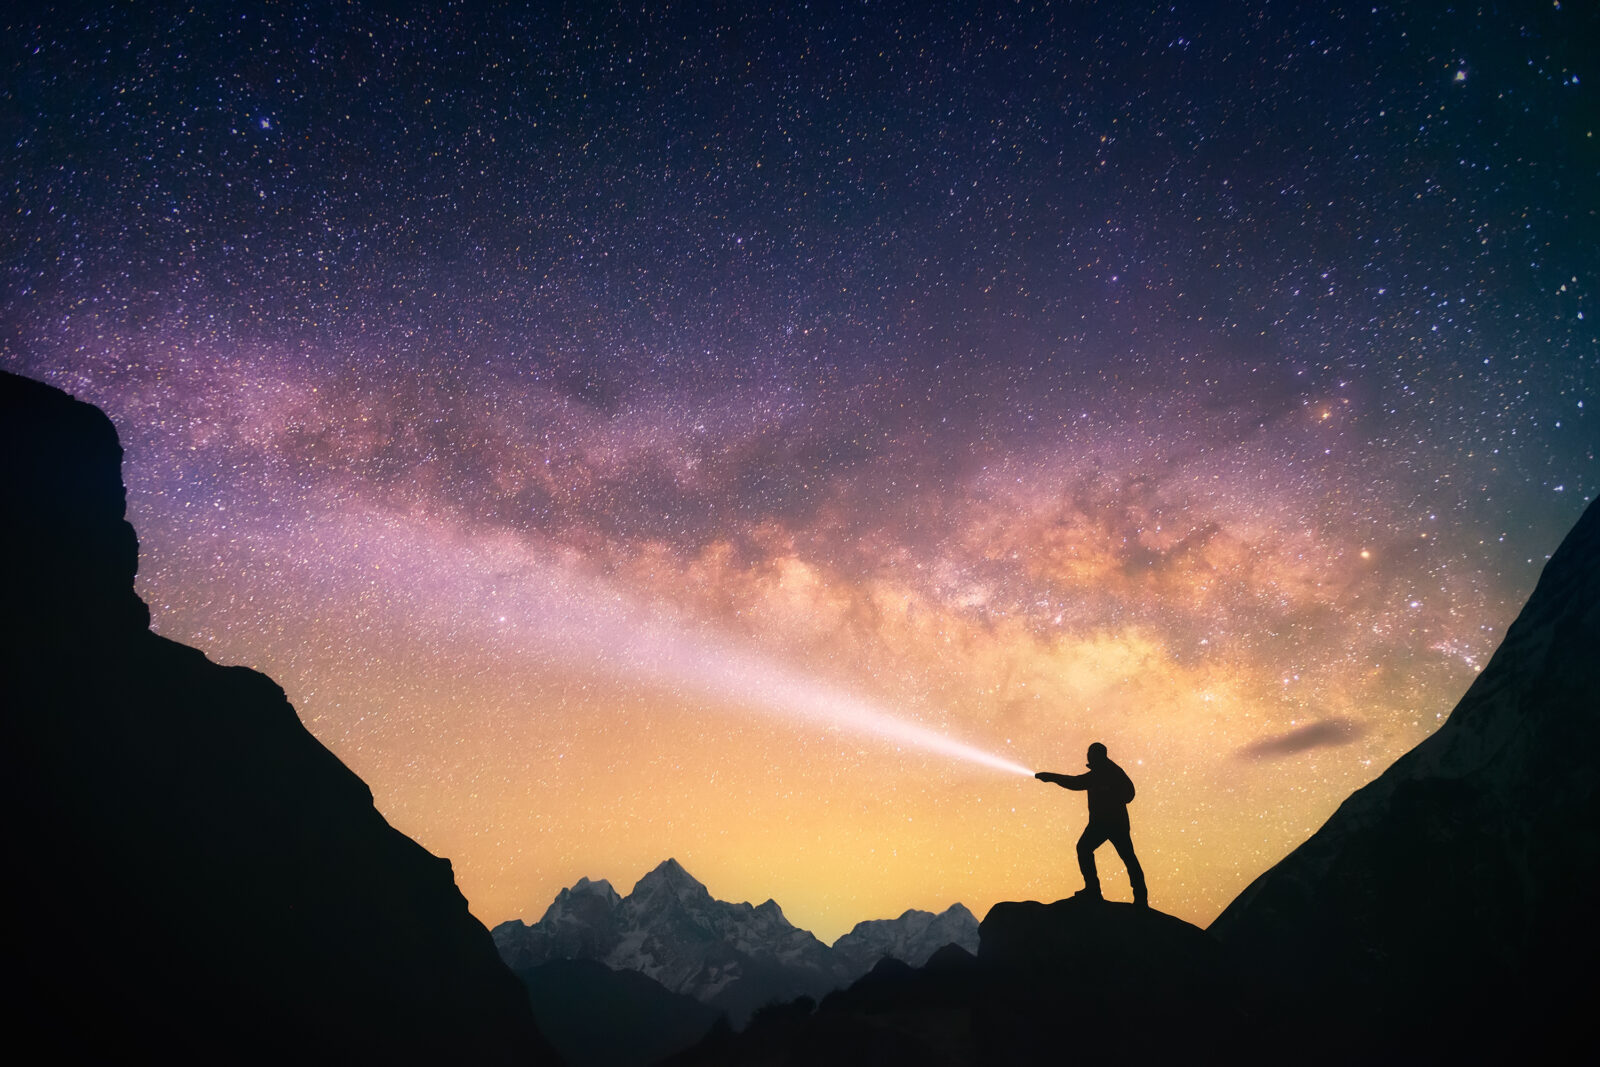 Silhouette of the man standing against the Milky Way in the mountains with a flashlight in his hands. Nepal, Everest region, view of the mount Thamserku (6,608 m) from Thame village (3,750 m).